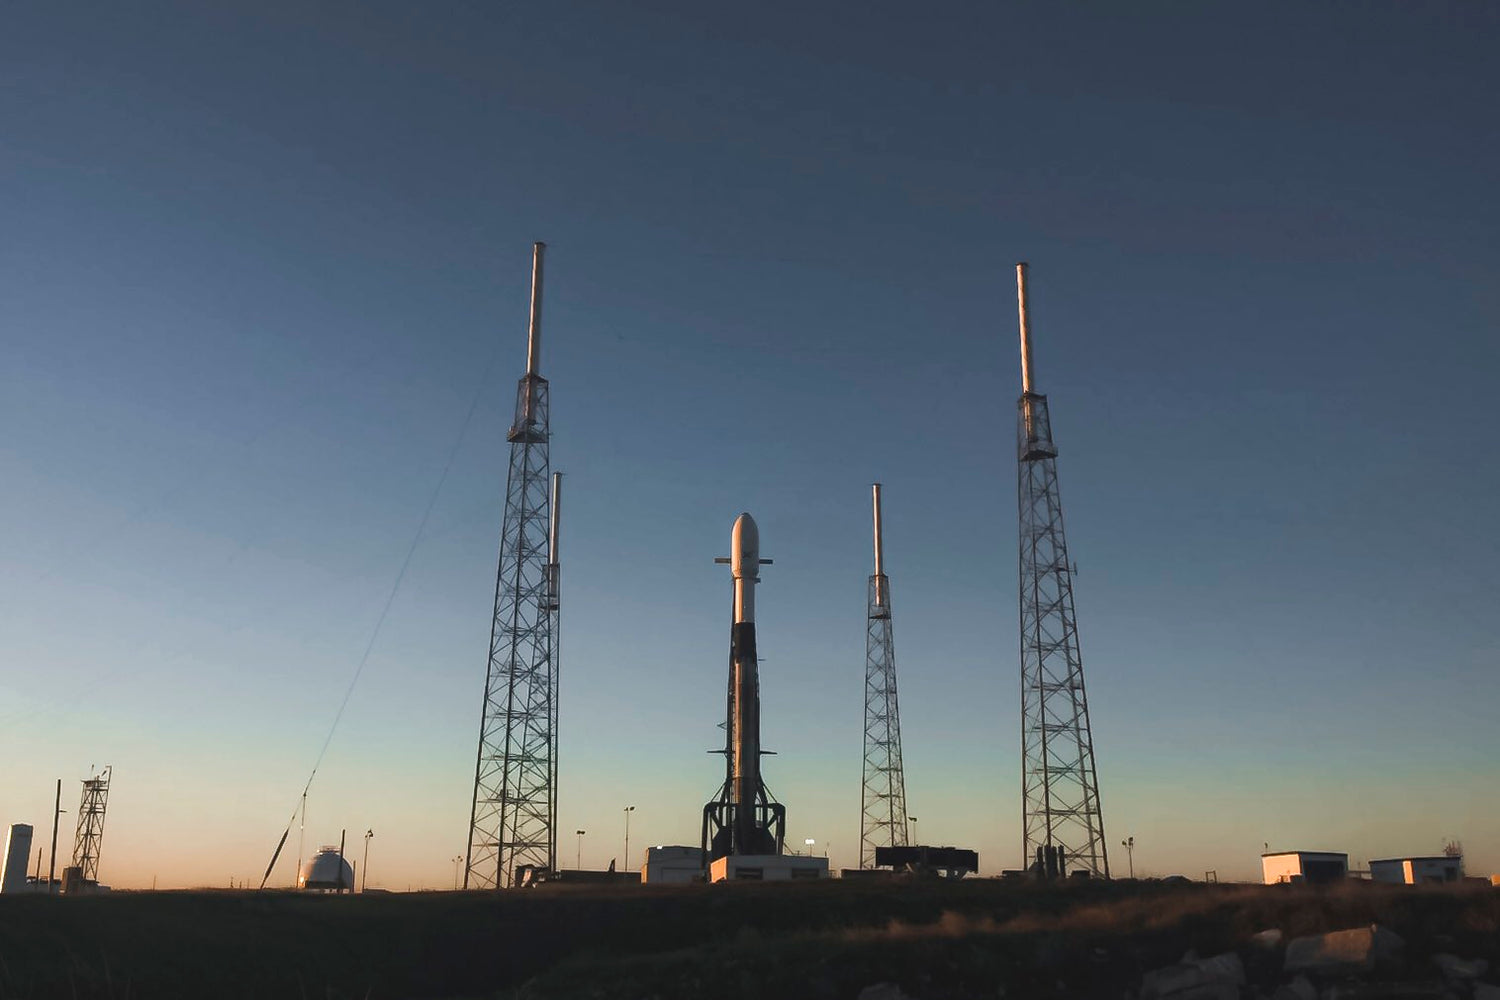 SpaceX will use a previously flown Falcon 9 rocket to deploy more Starlink satellites tonight. Watch it live!